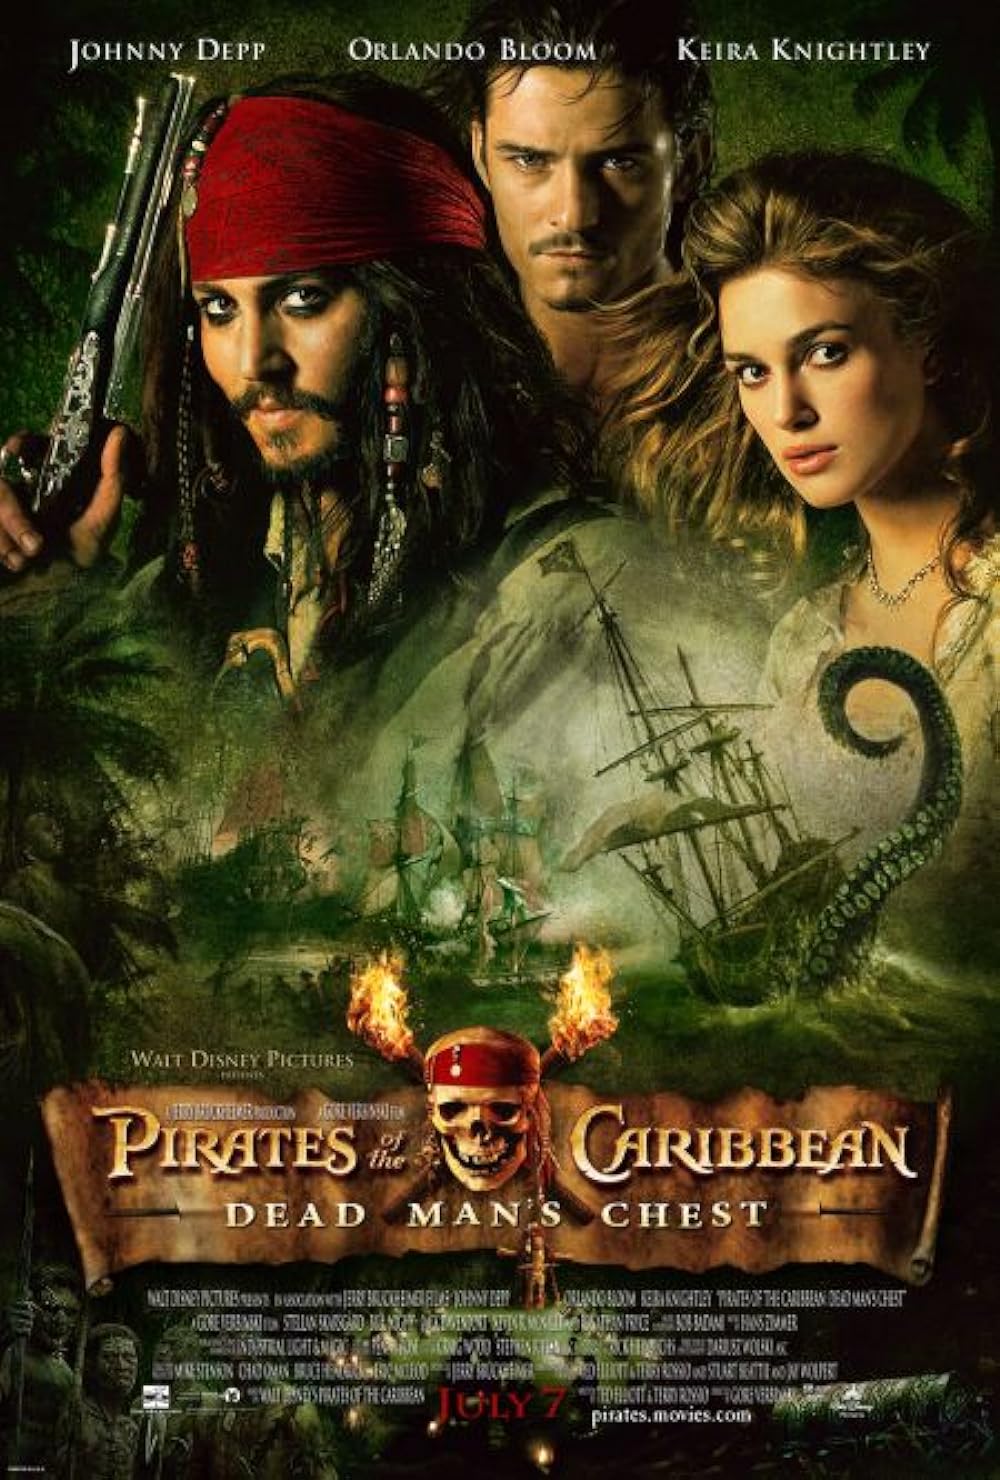 christopher wiencek recommends watch pirates xxx online pic